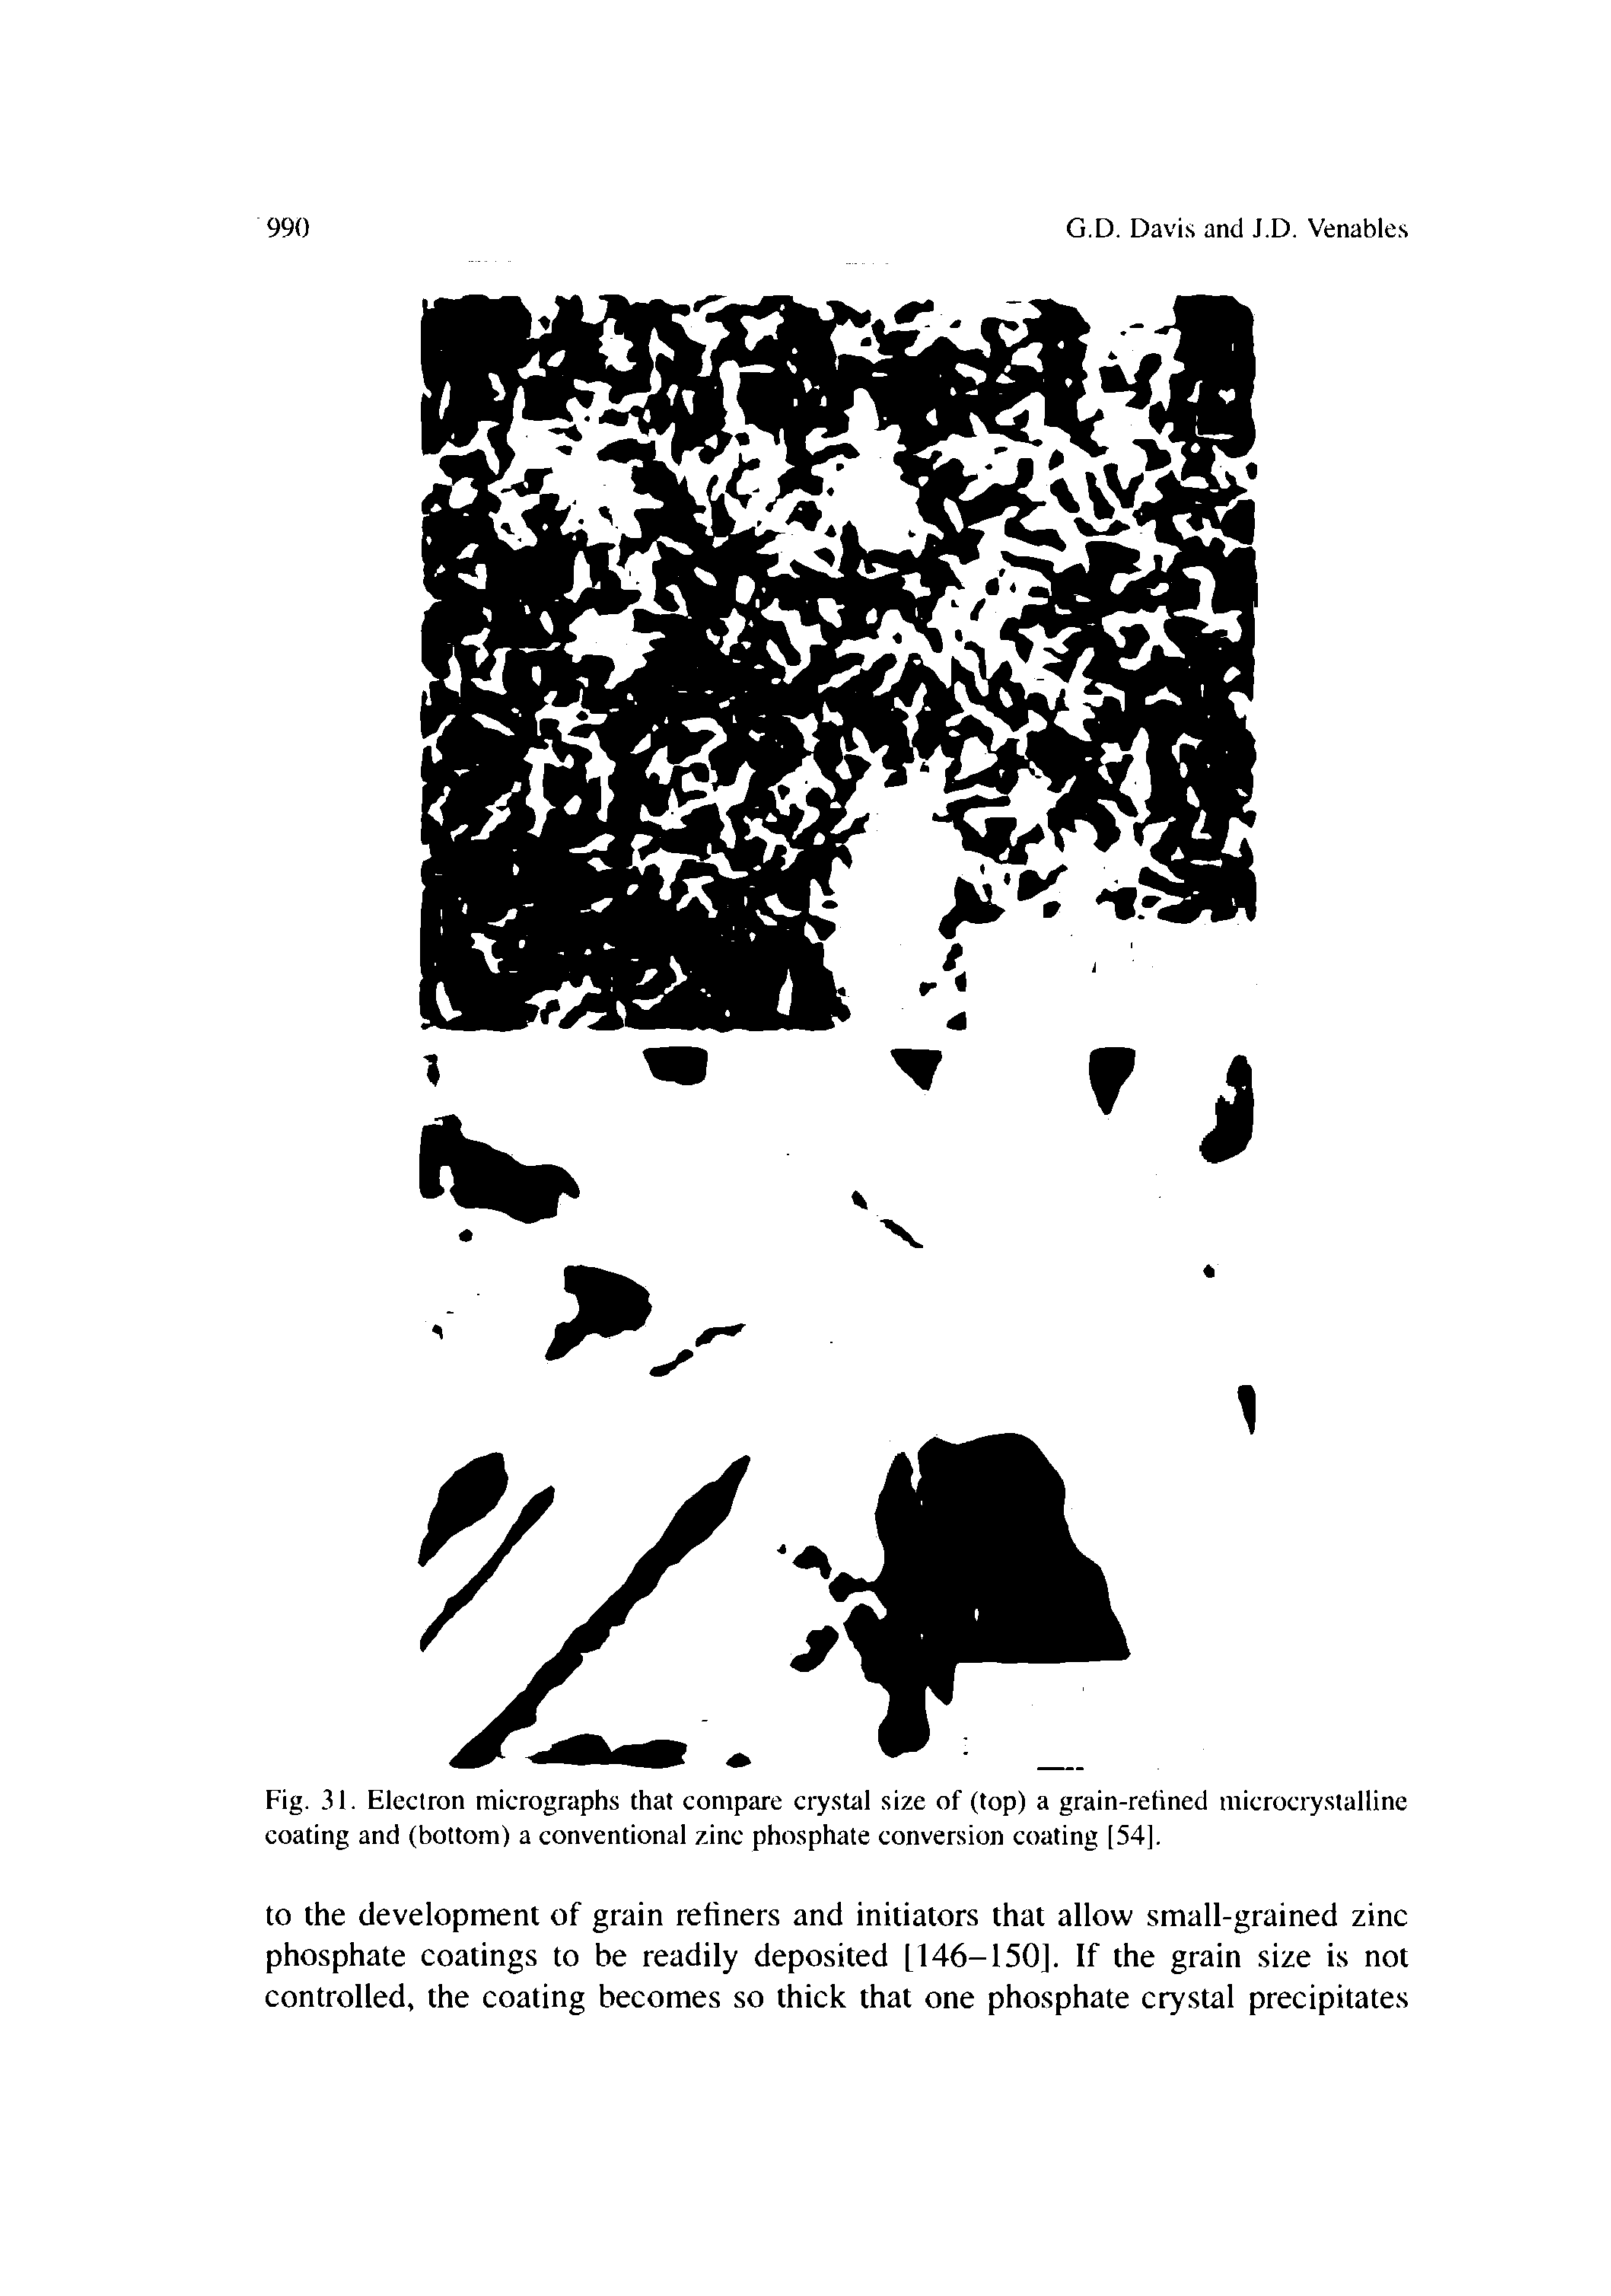 Fig. 31. Electron micrographs that compare crystal size of (top) a grain-refined microcrystalline coating and (bottom) a conventional zinc phosphate conversion coating [54].